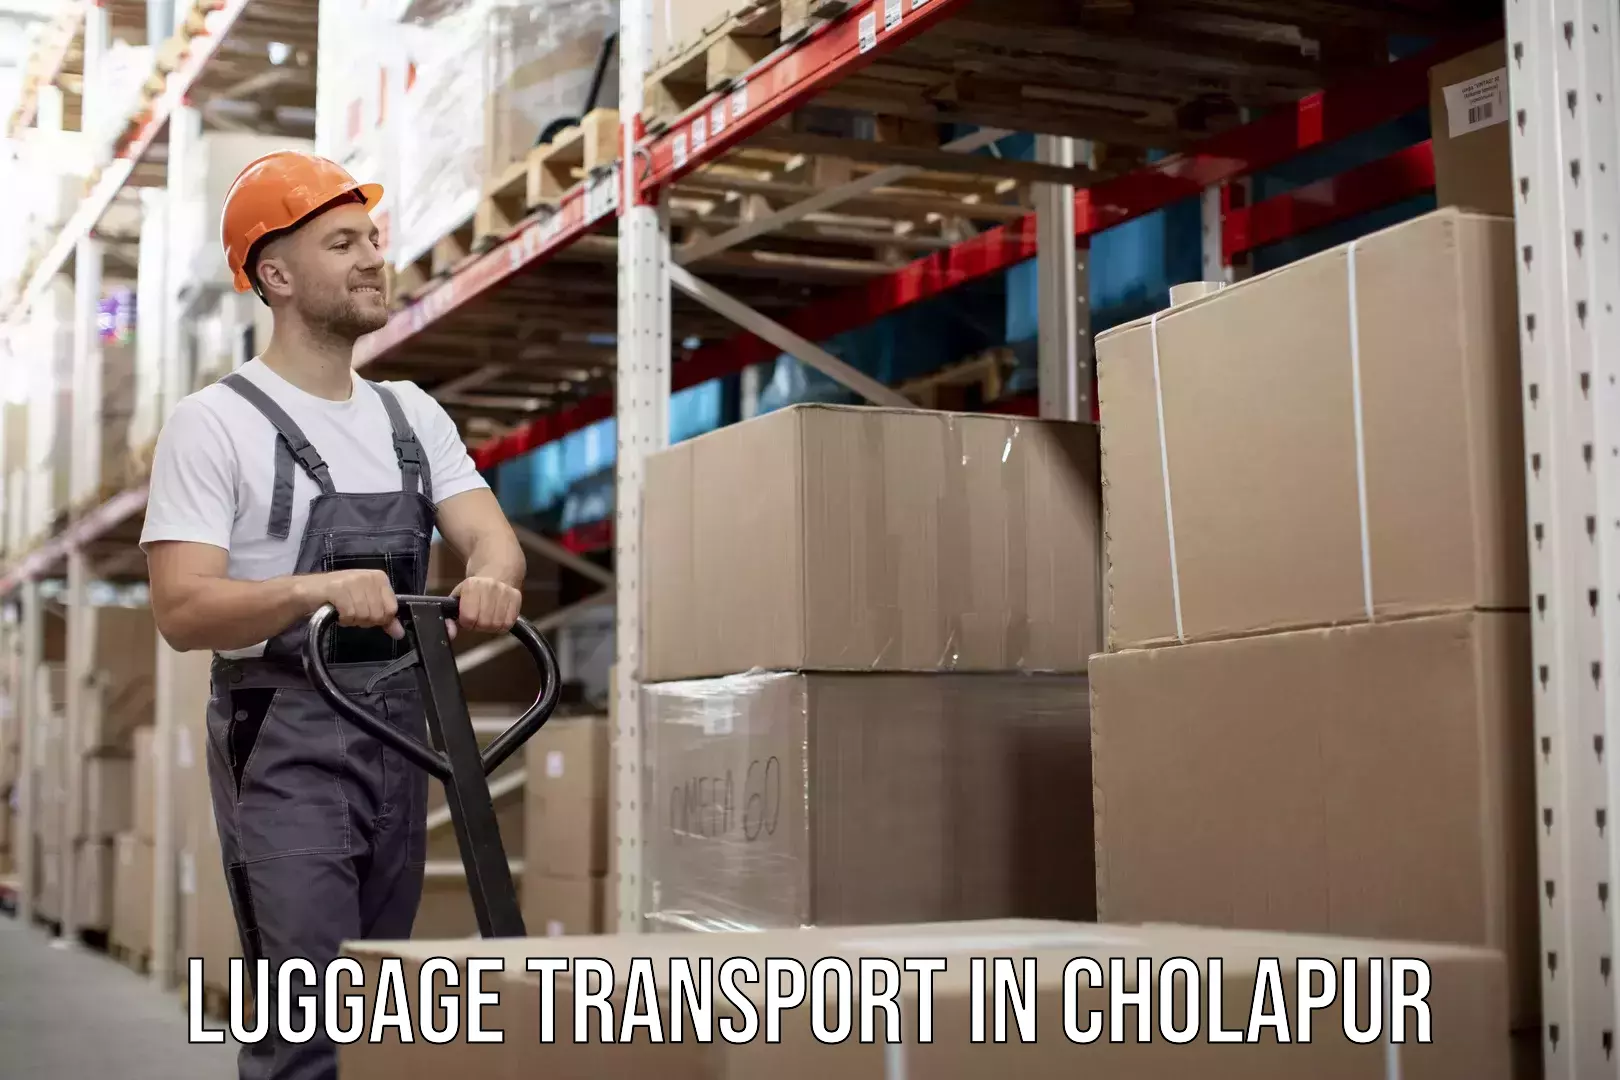 Luggage shipping discounts in Cholapur